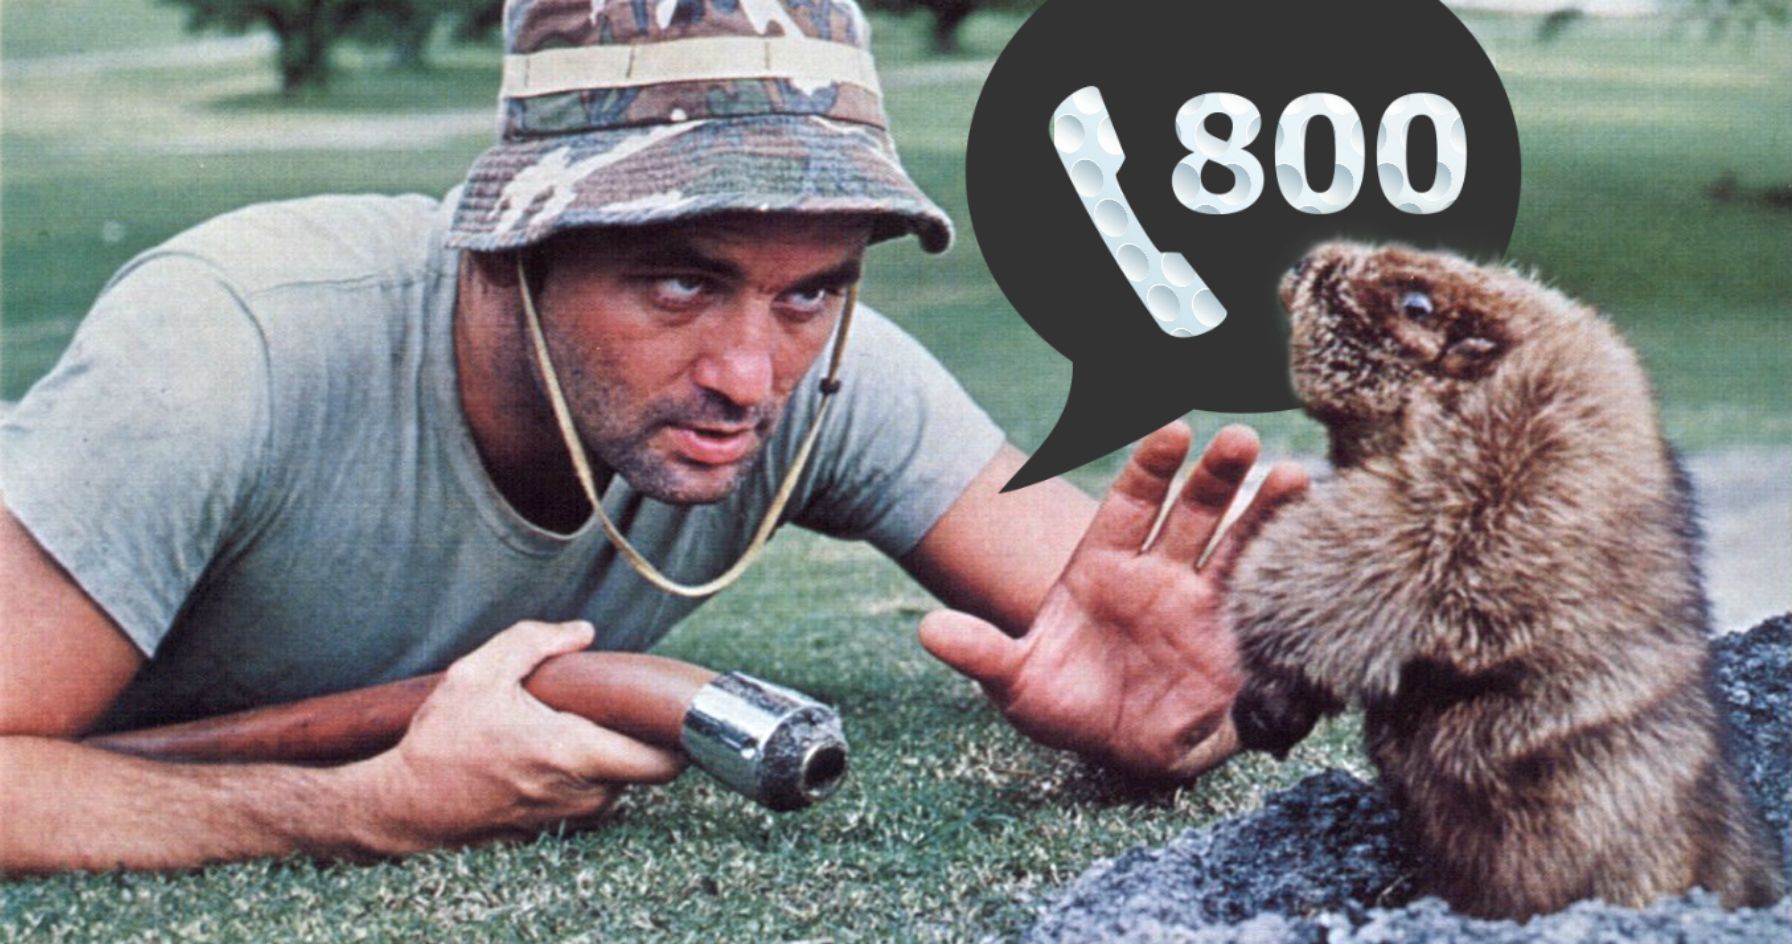 Bill Murray Breaks Down His Mythical 1-800 Number and Why He Needs It